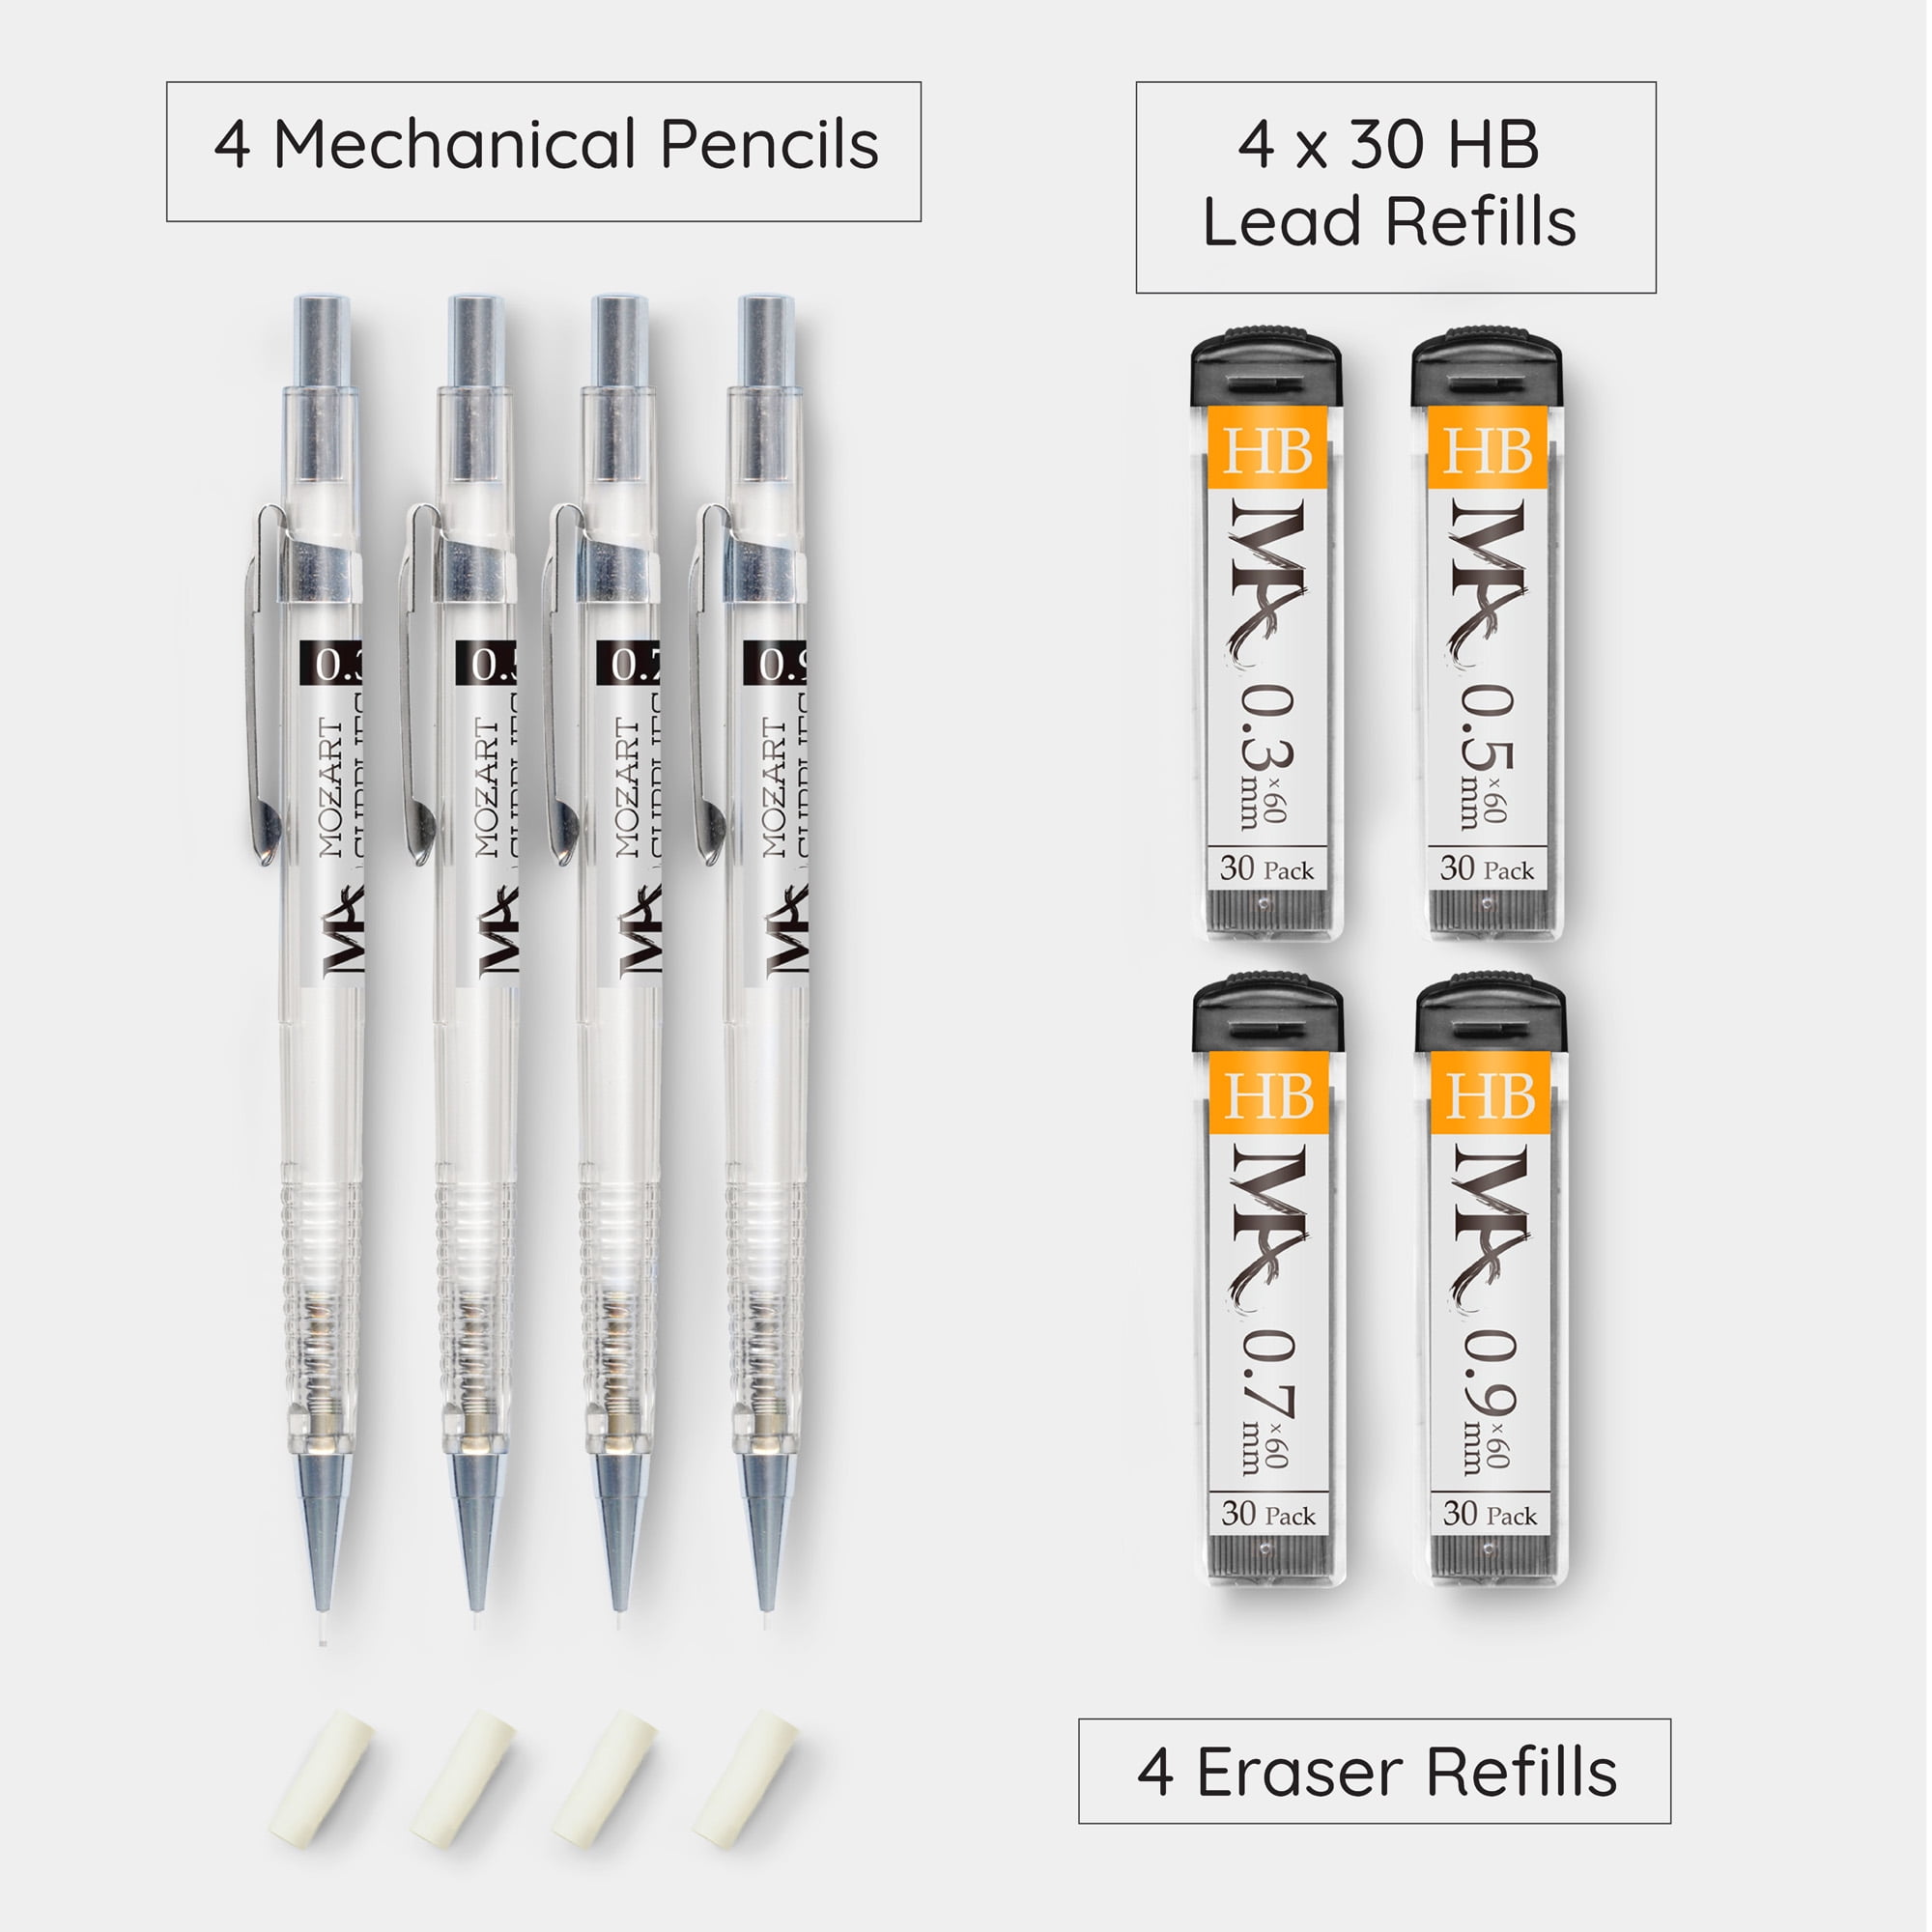 Essential Mechanical Pencil Set with HB Lead Eraser Refills Drafting,  Sketching, Illustrations, Engineering Architecture MozArt Supplies - 4  Sizes